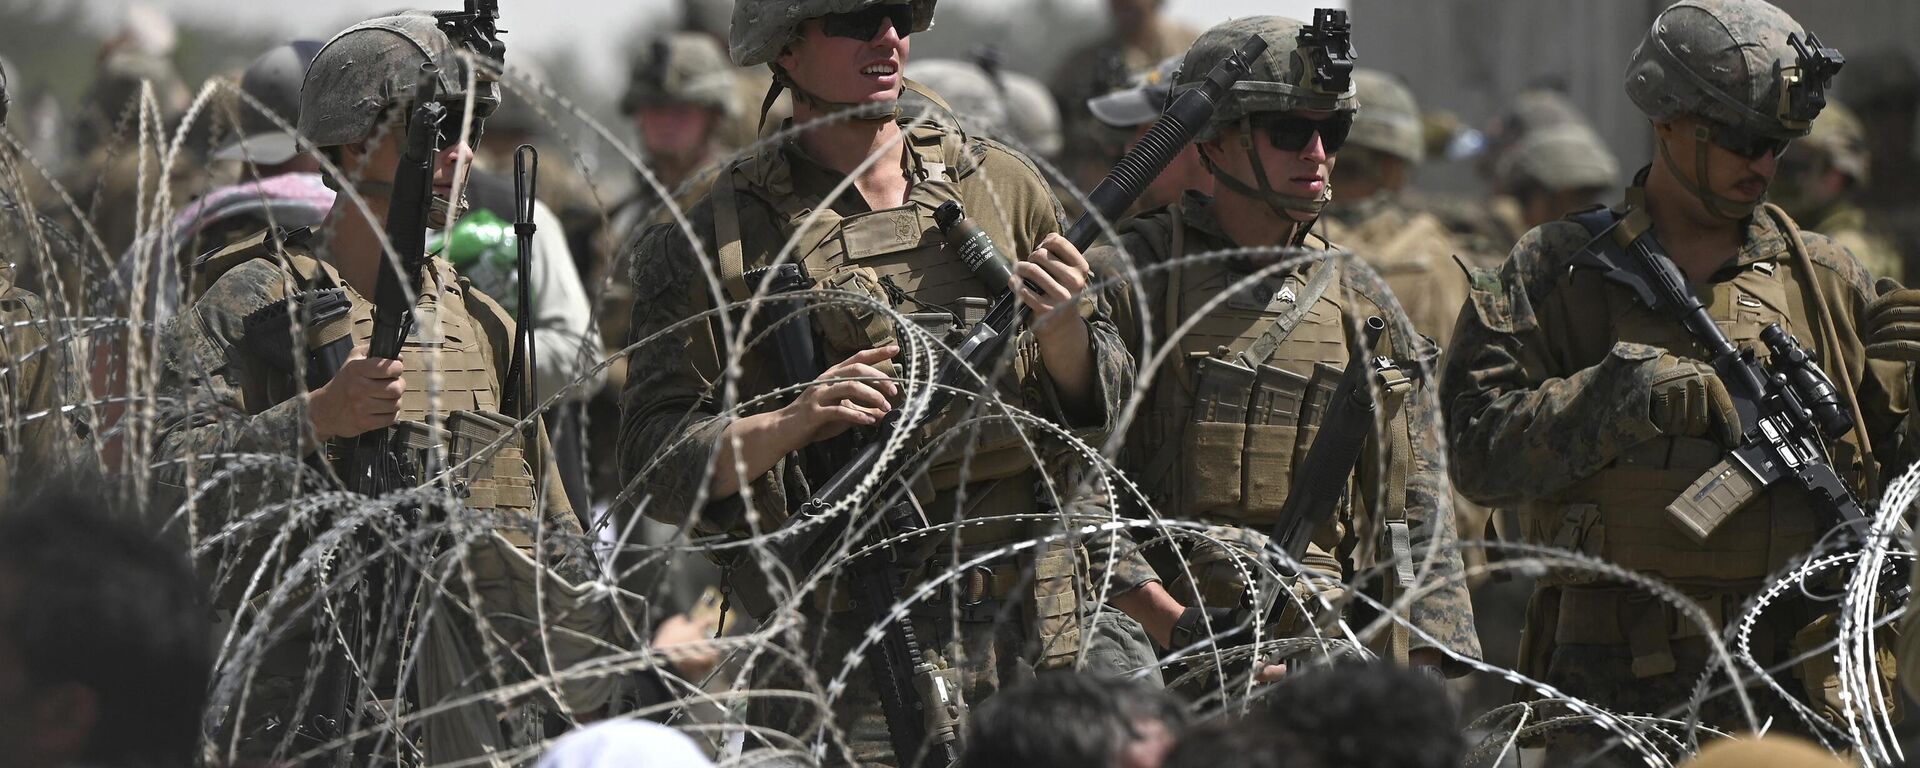 US soldiers stand guard behind barbed wire as Afghans sit on a roadside near the military part of the airport in Kabul on August 20, 2021, hoping to flee from the country after the Taliban's military takeover of Afghanistan - Sputnik International, 1920, 09.04.2023